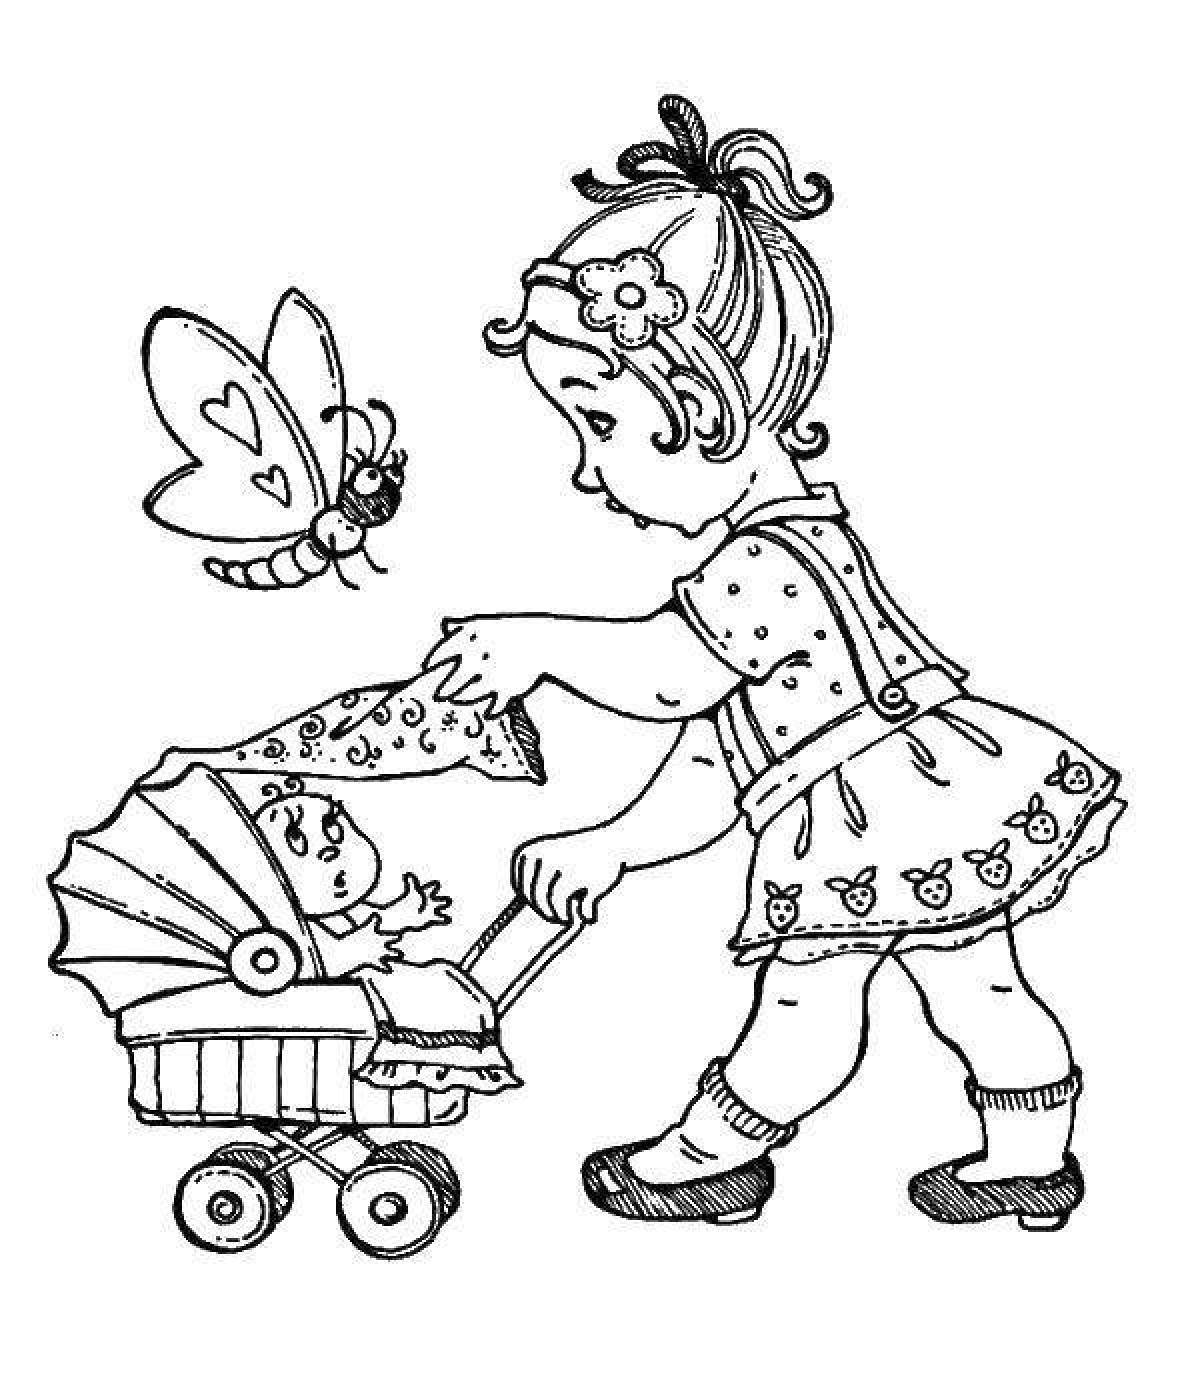 The edge of the charming babys coloring page